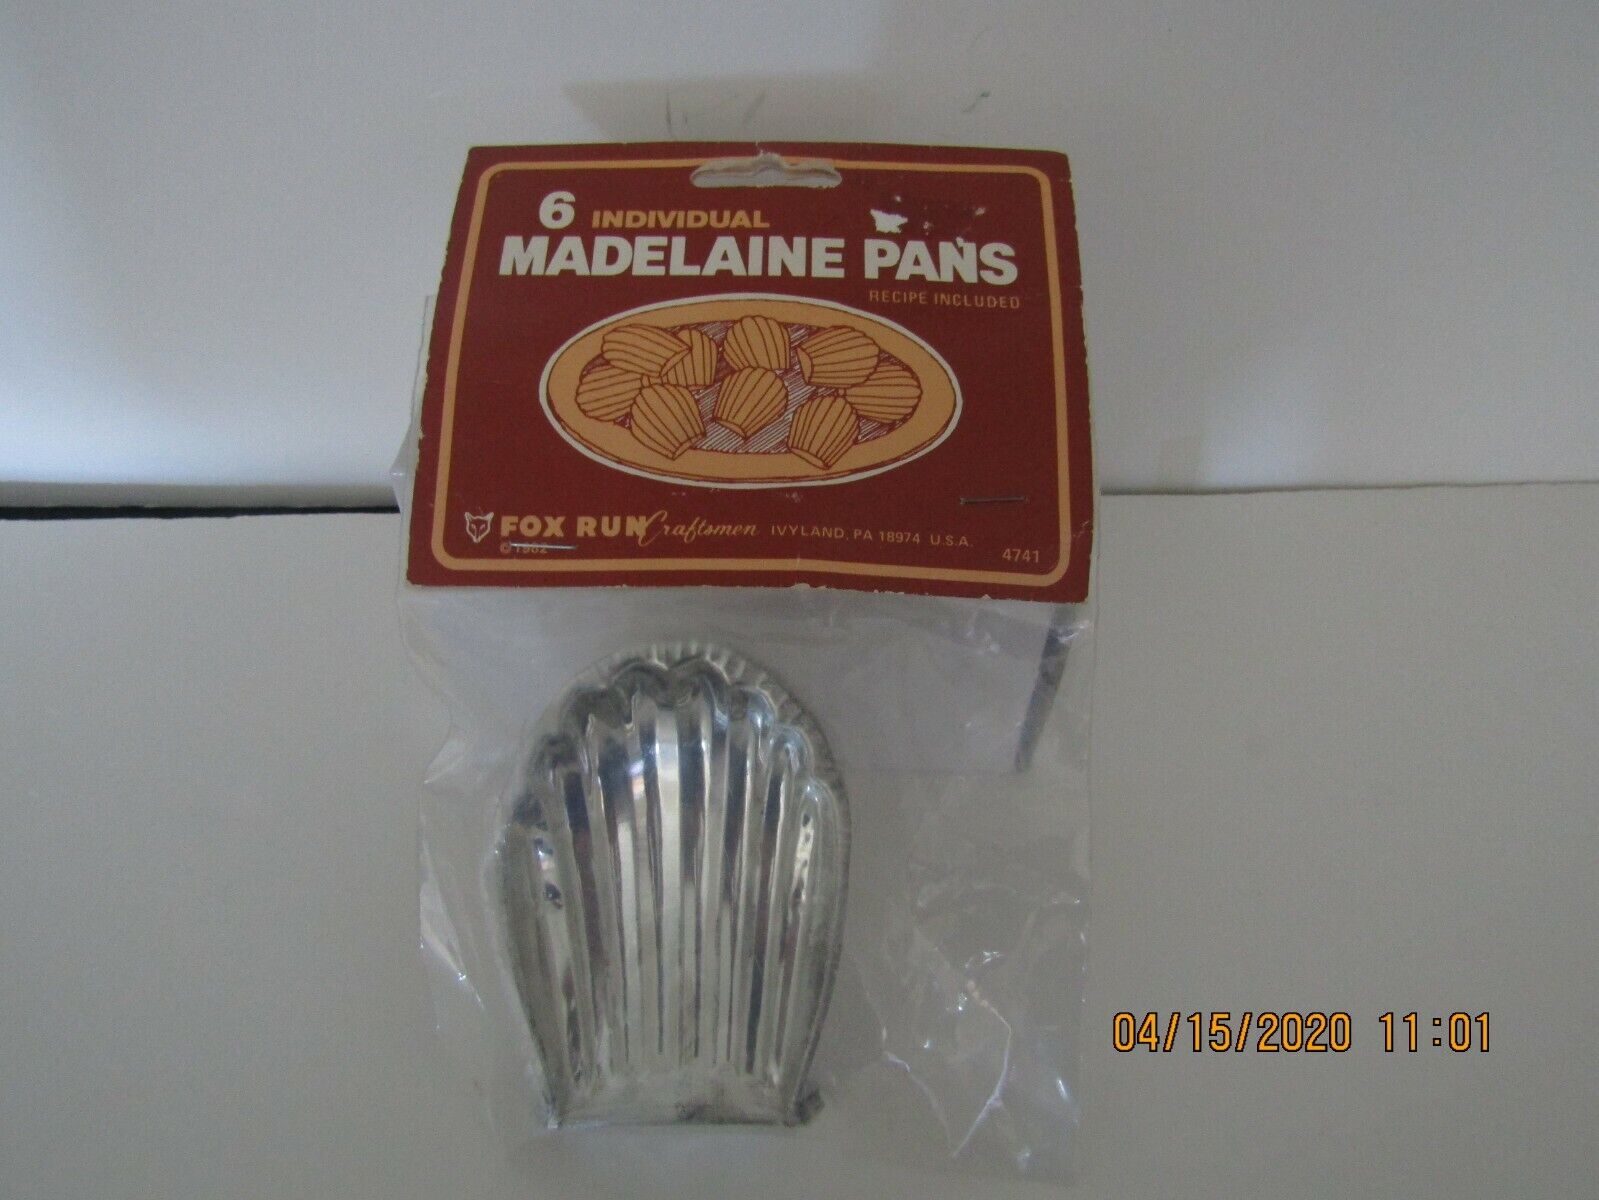 Six 6 Individual Madelaine gift Surprise price Pans Fox - Packag New Run #4741 in